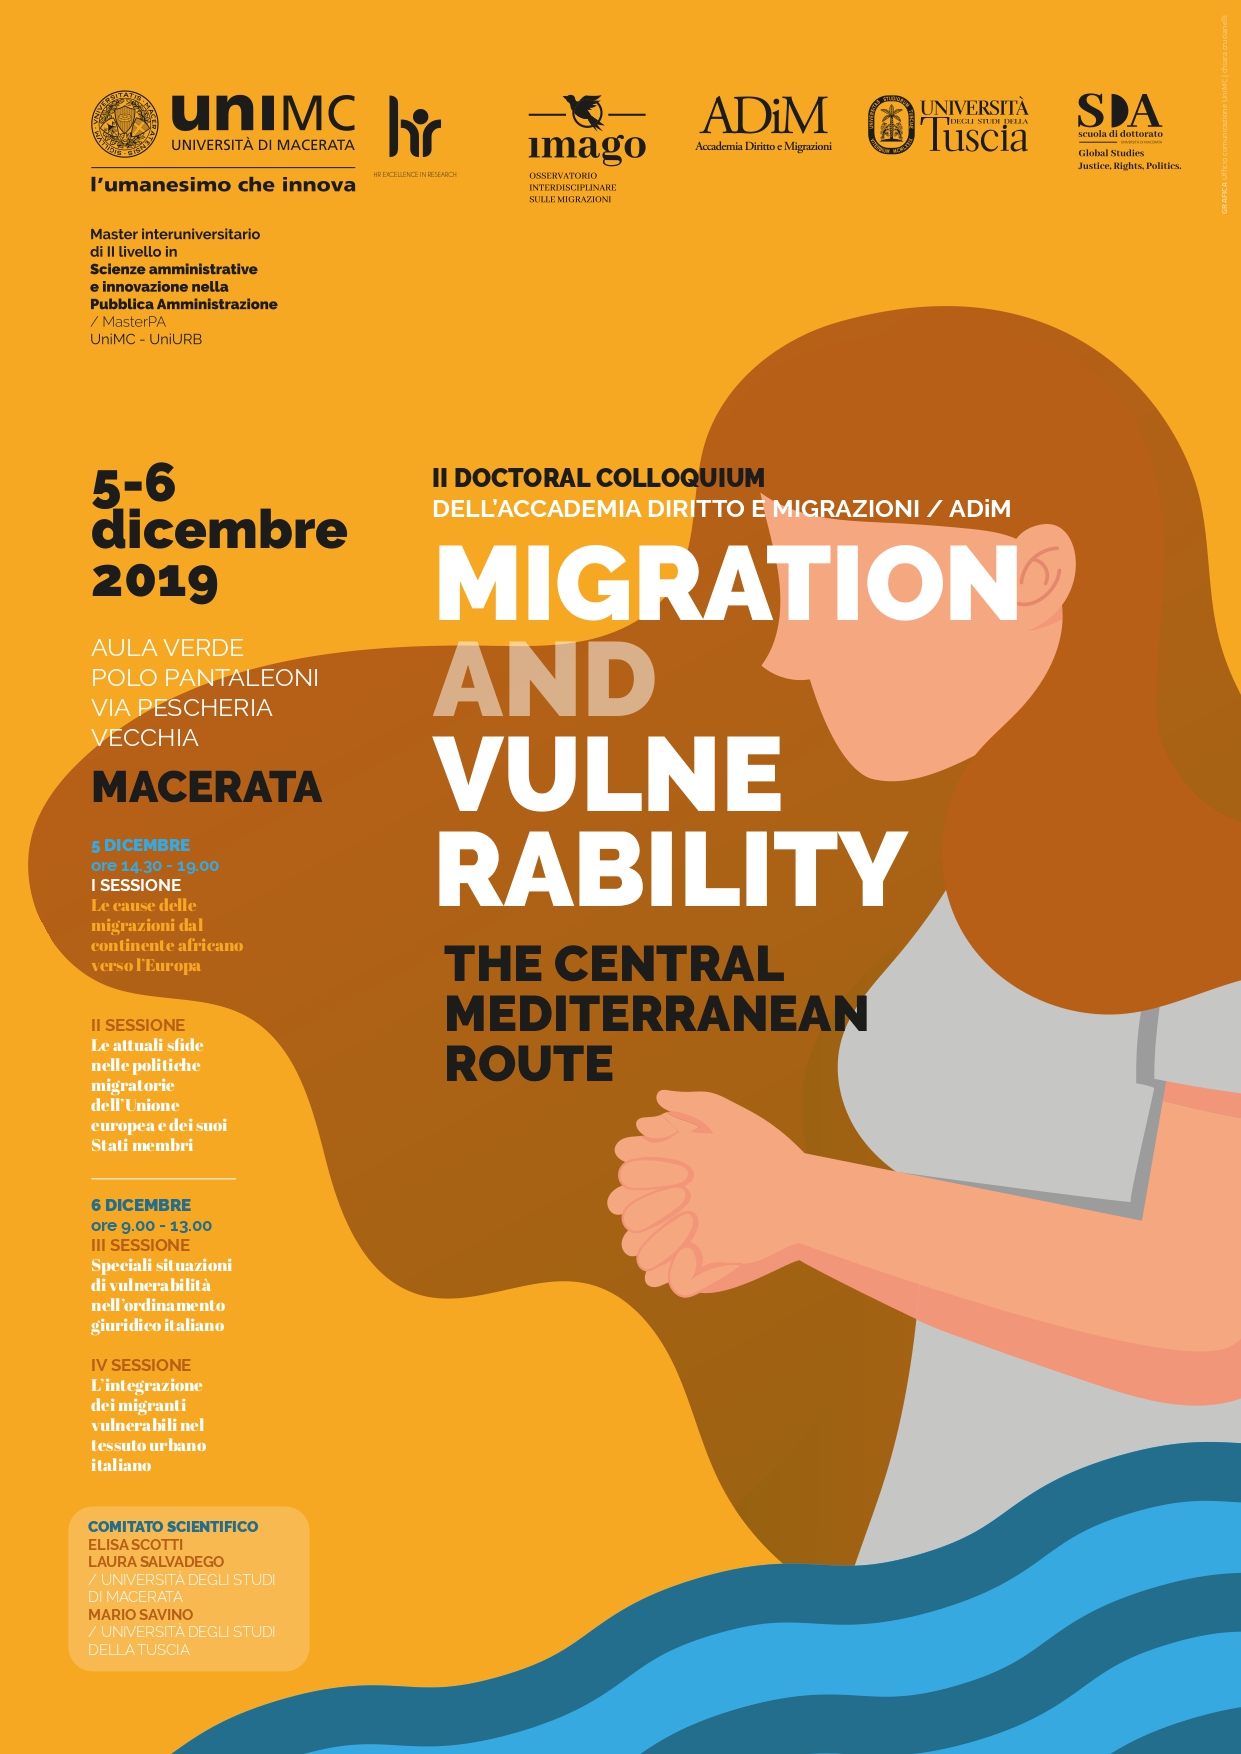 Migration and Vulnerability: The Central Mediterranean Route